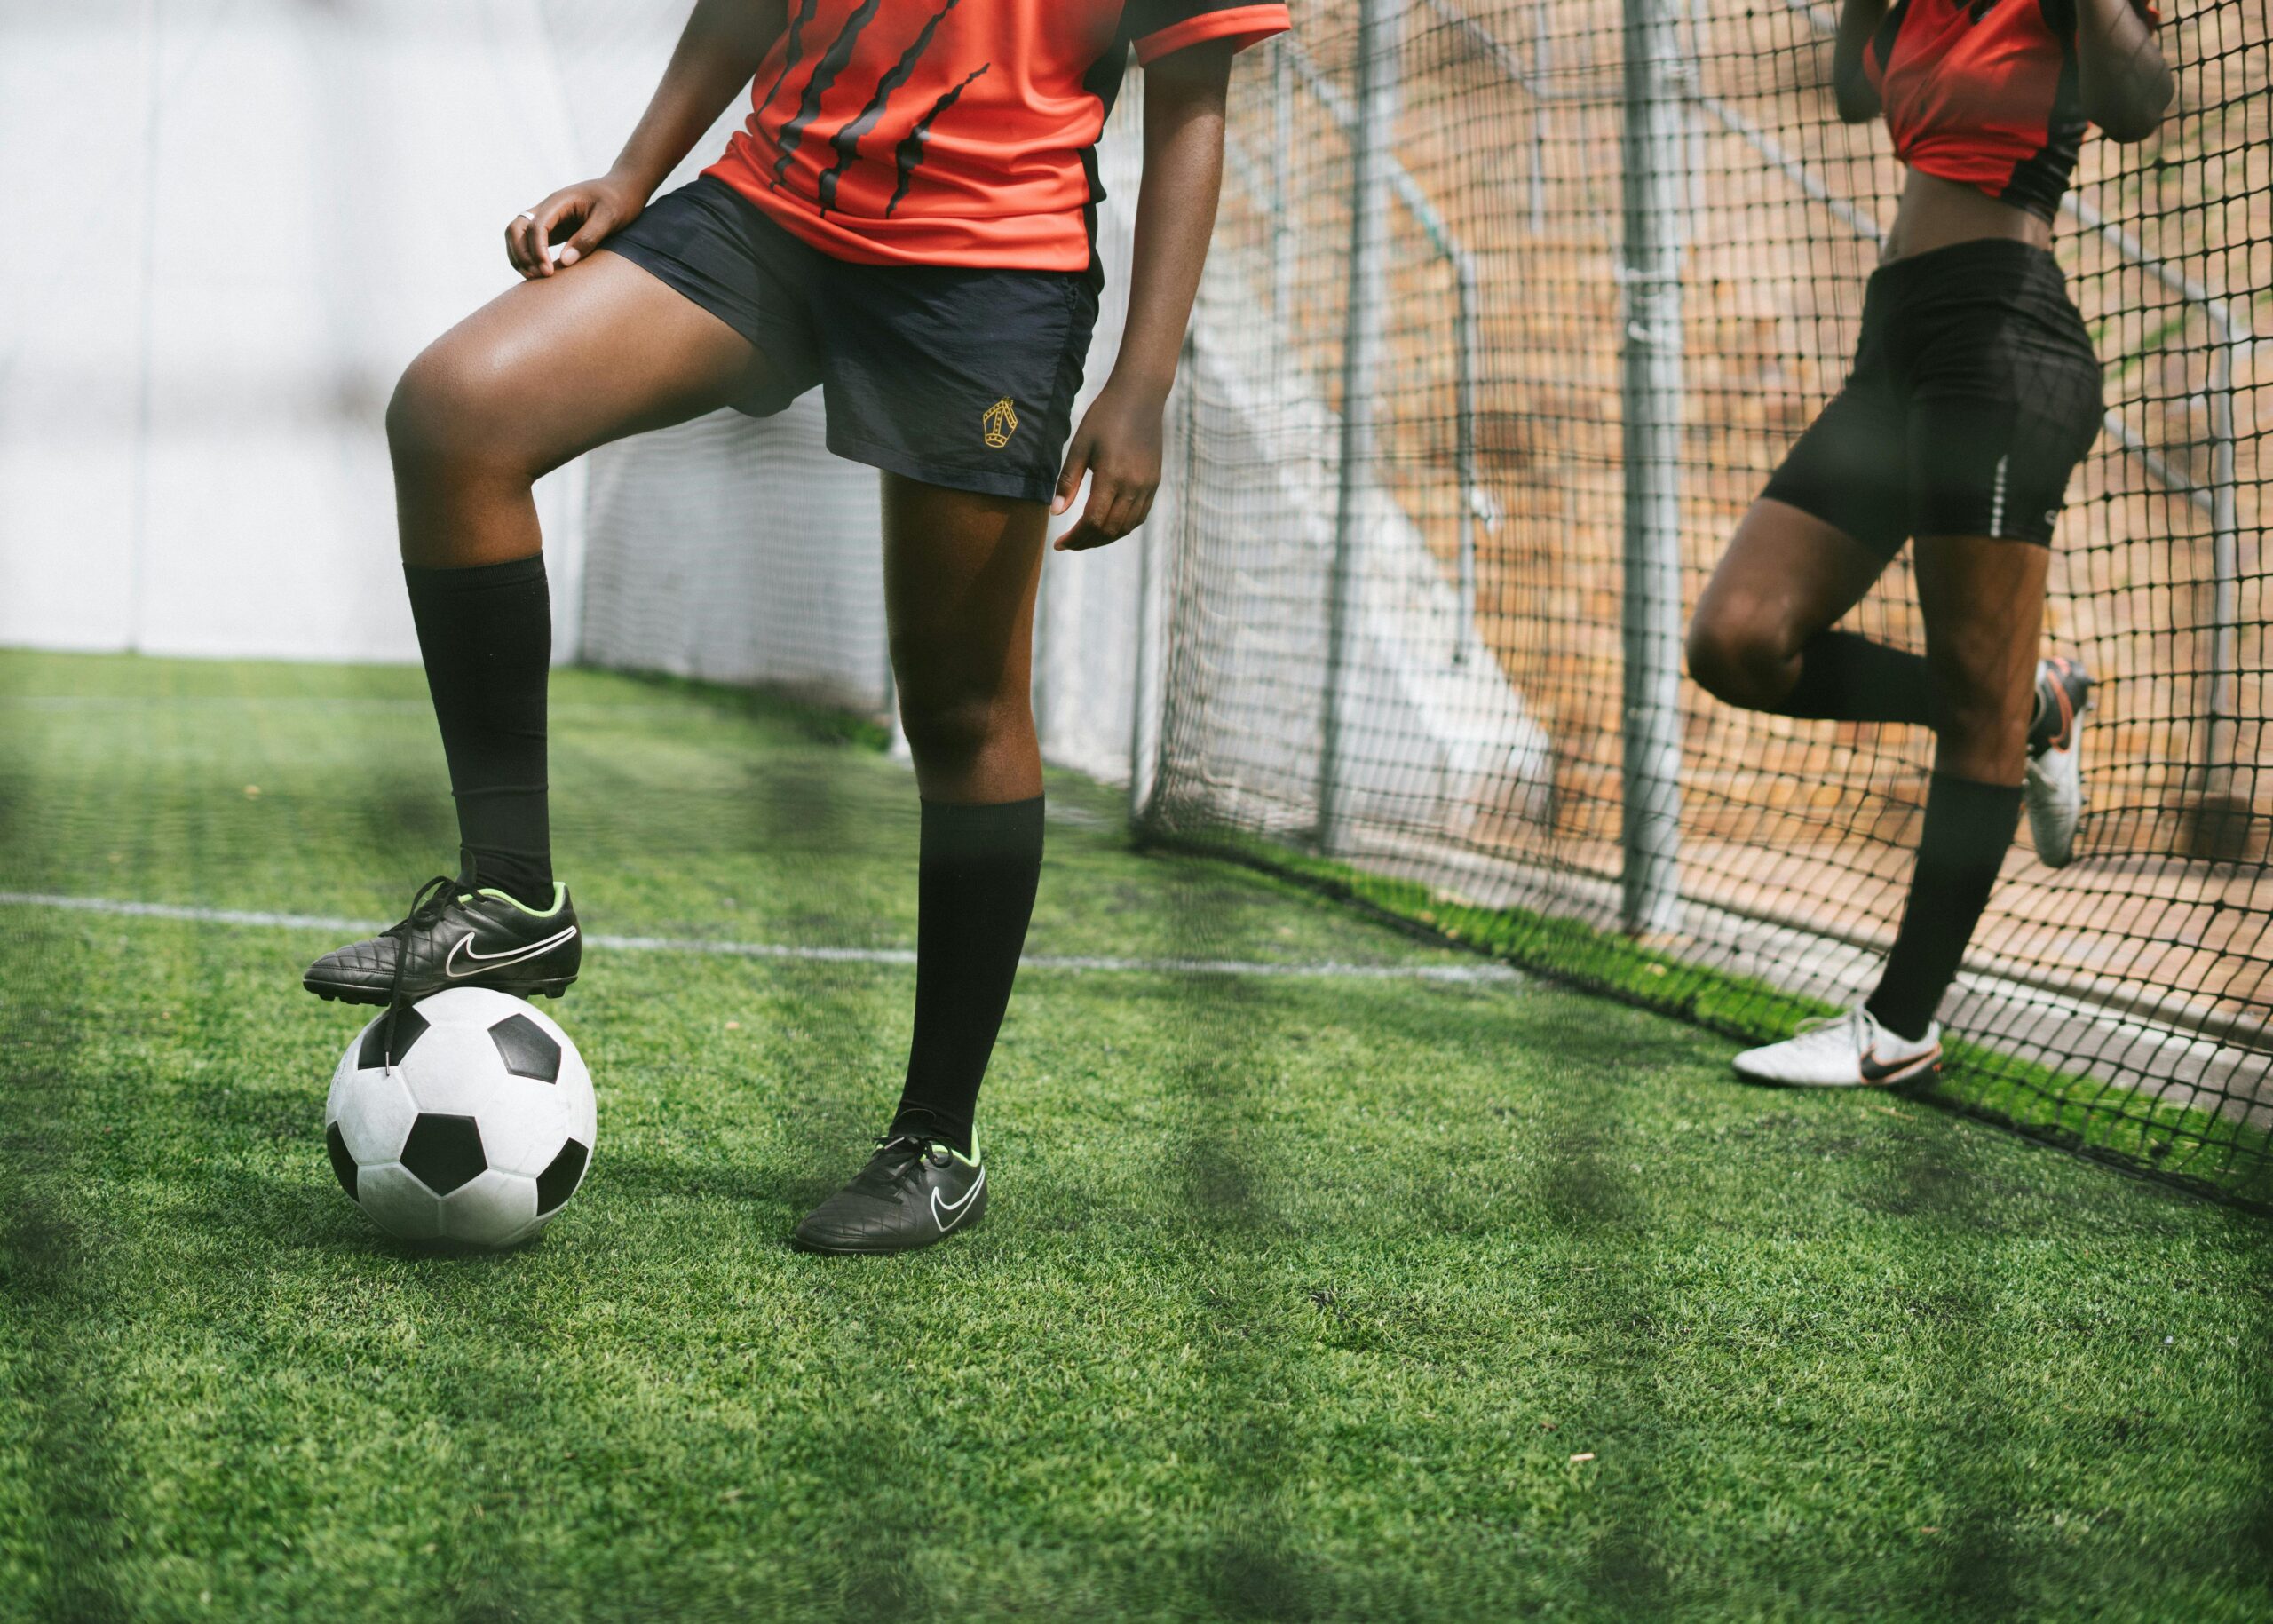 Level Up Your Skills Must-Have Football Training Equipment